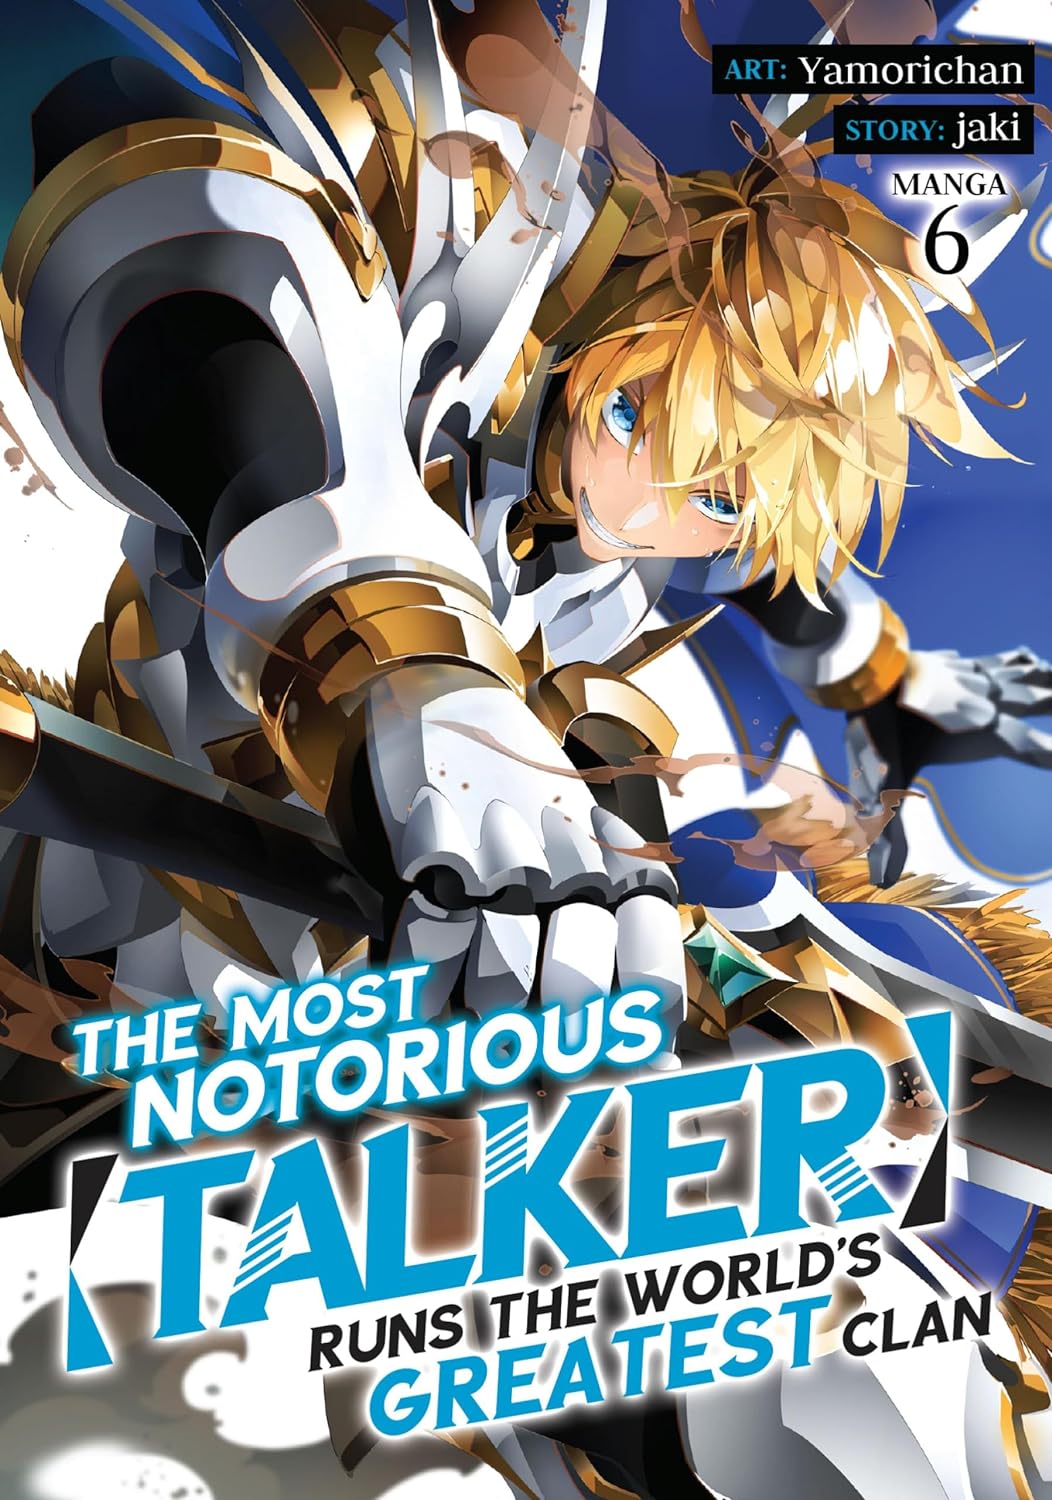 (16/01/2024) The Most Notorious Talker Runs the Worlds Greatest Clan (Manga) Vol. 06